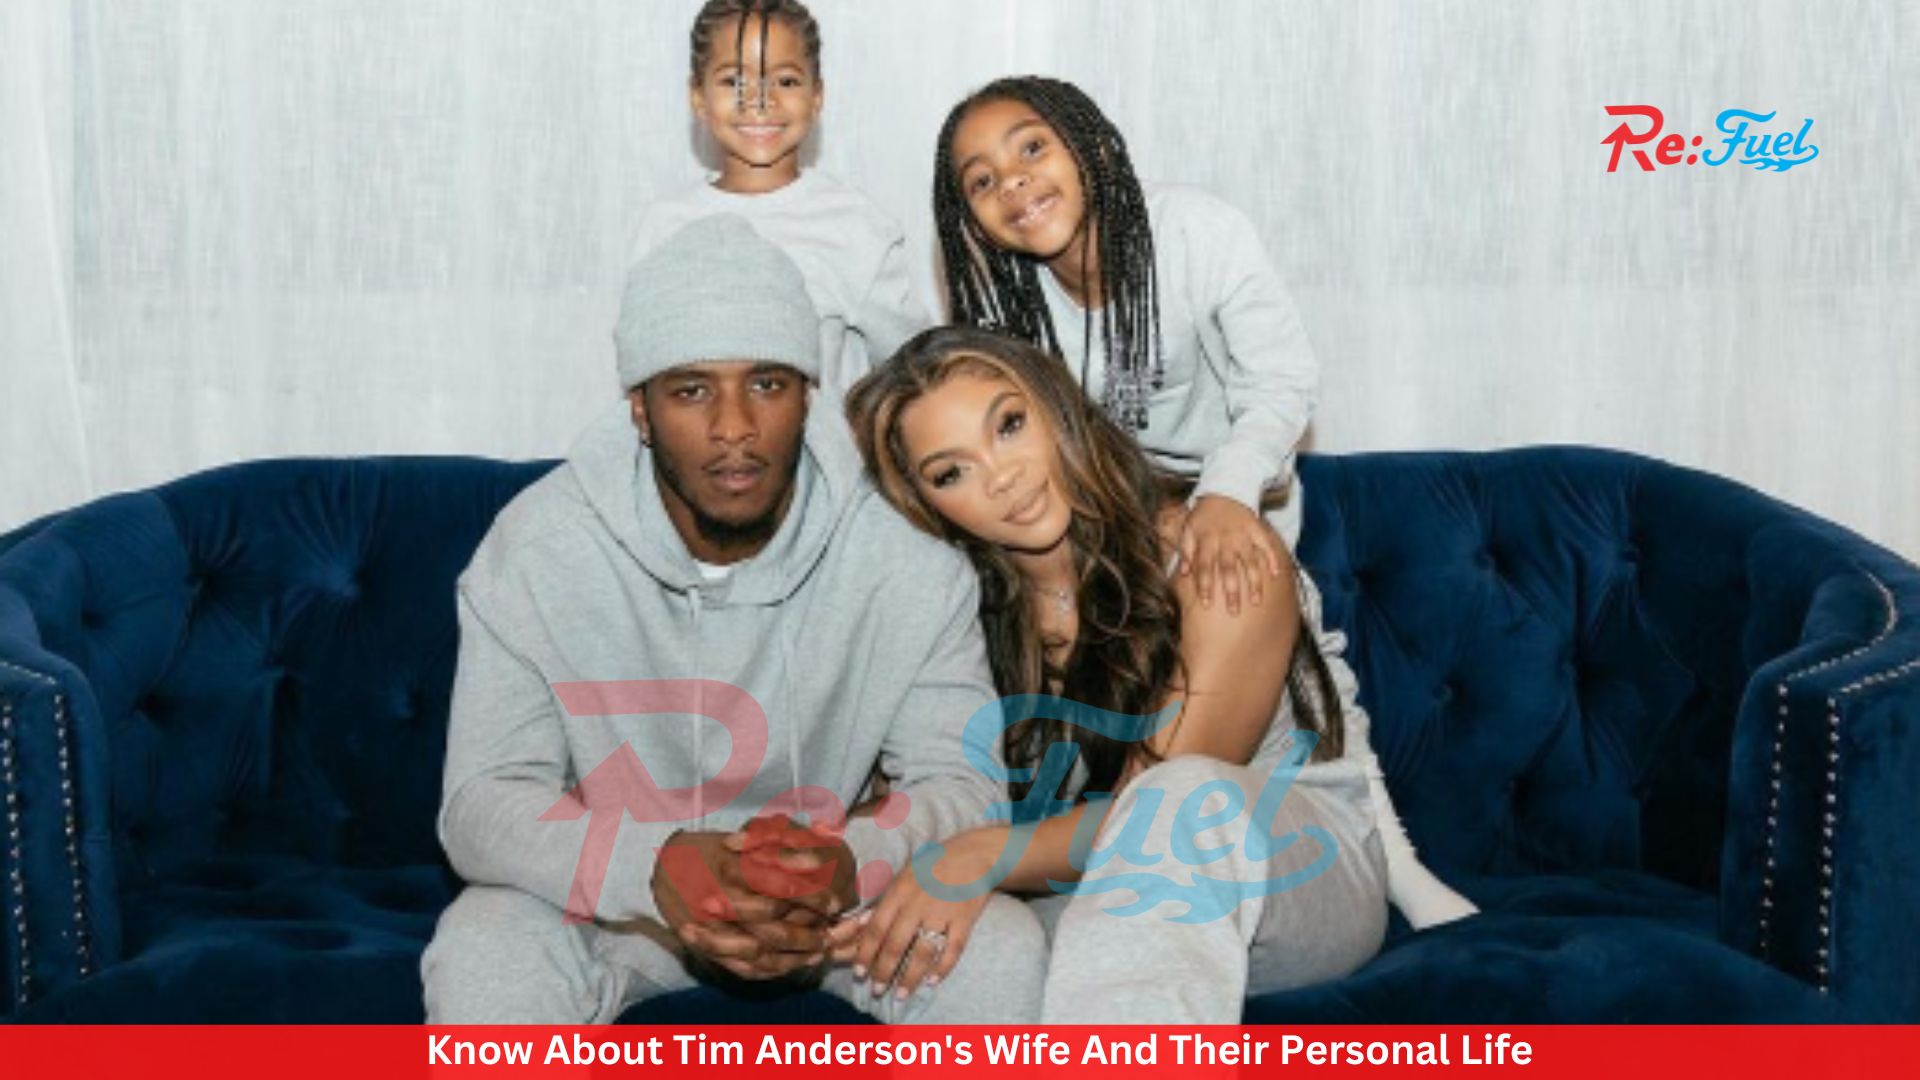 Know About Tim Anderson's Wife And Their Personal Life